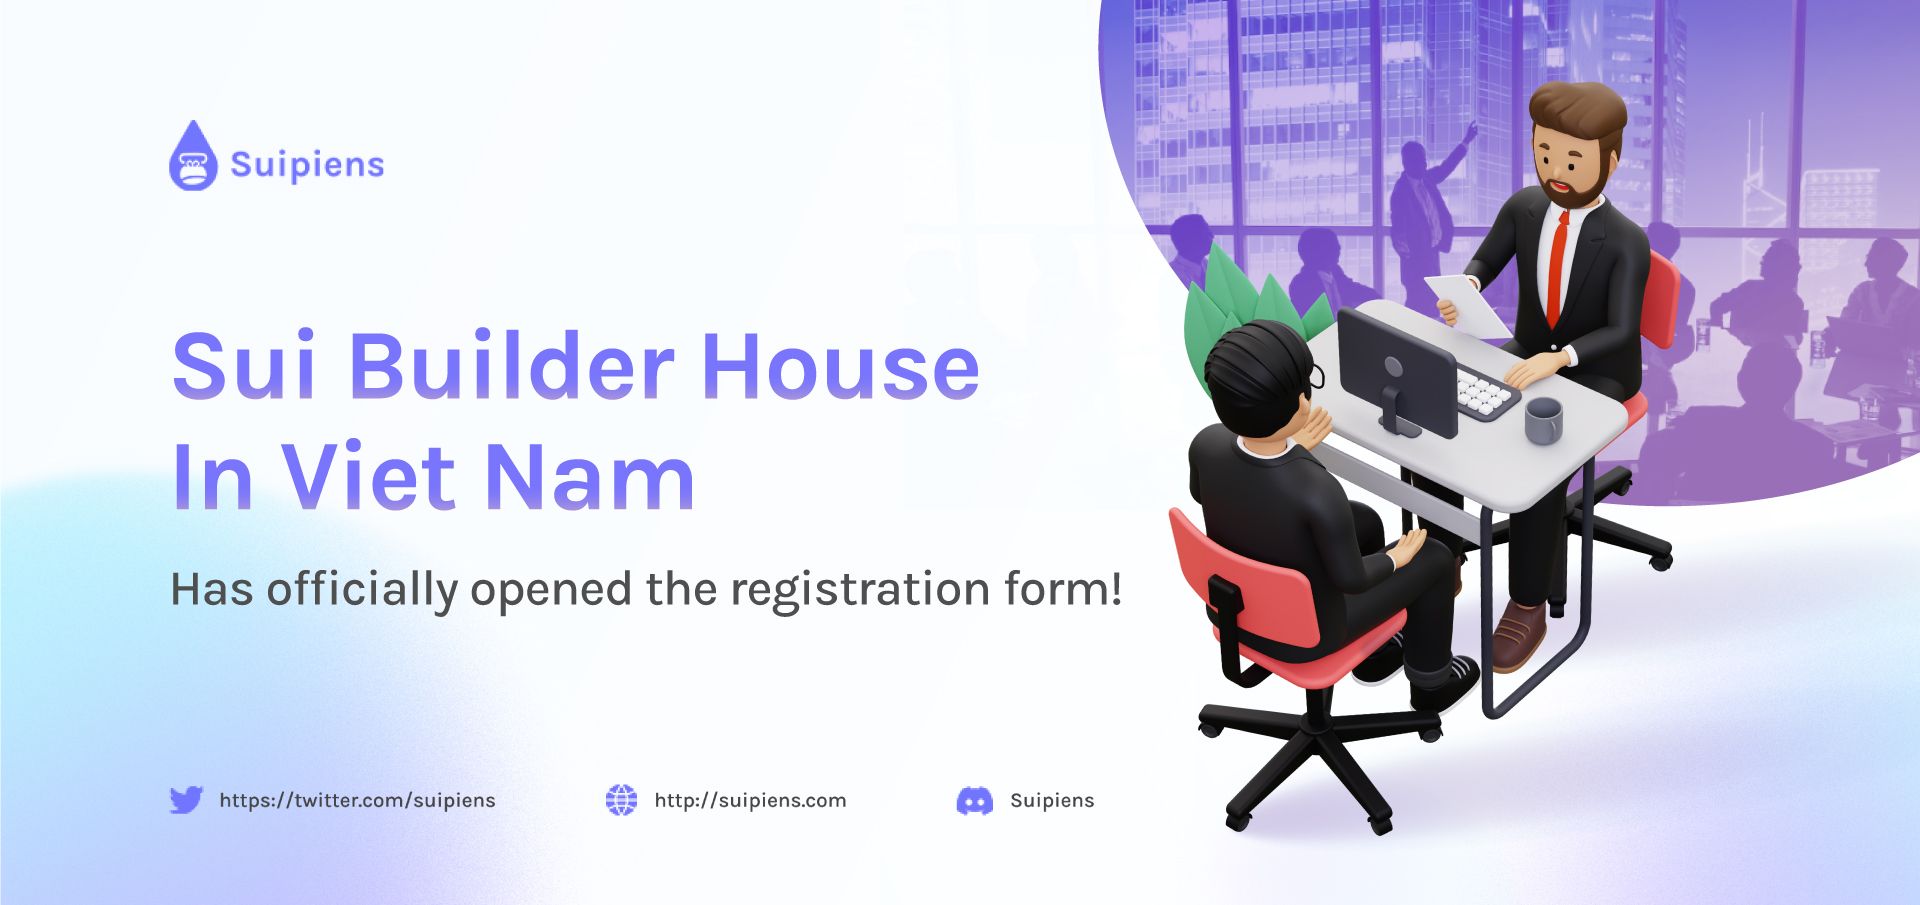 Sui Builder House In Viet Nam has officially opened the registration form!